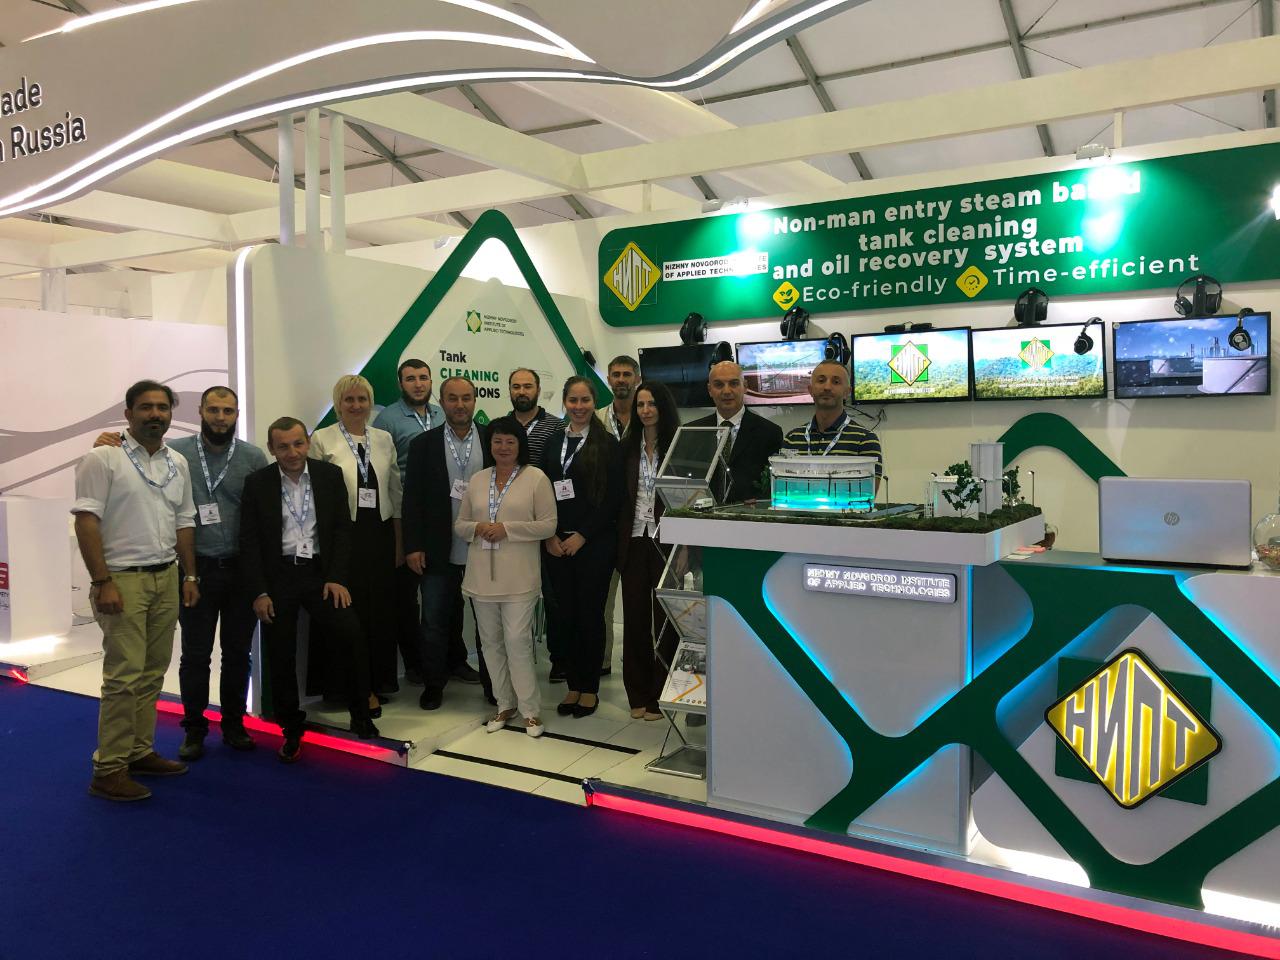 Nizhny Novgorod Institute of Applied Technologies took part in the 21st International Oil and Gas industry Exhibition & Conference ADIPEC 2018